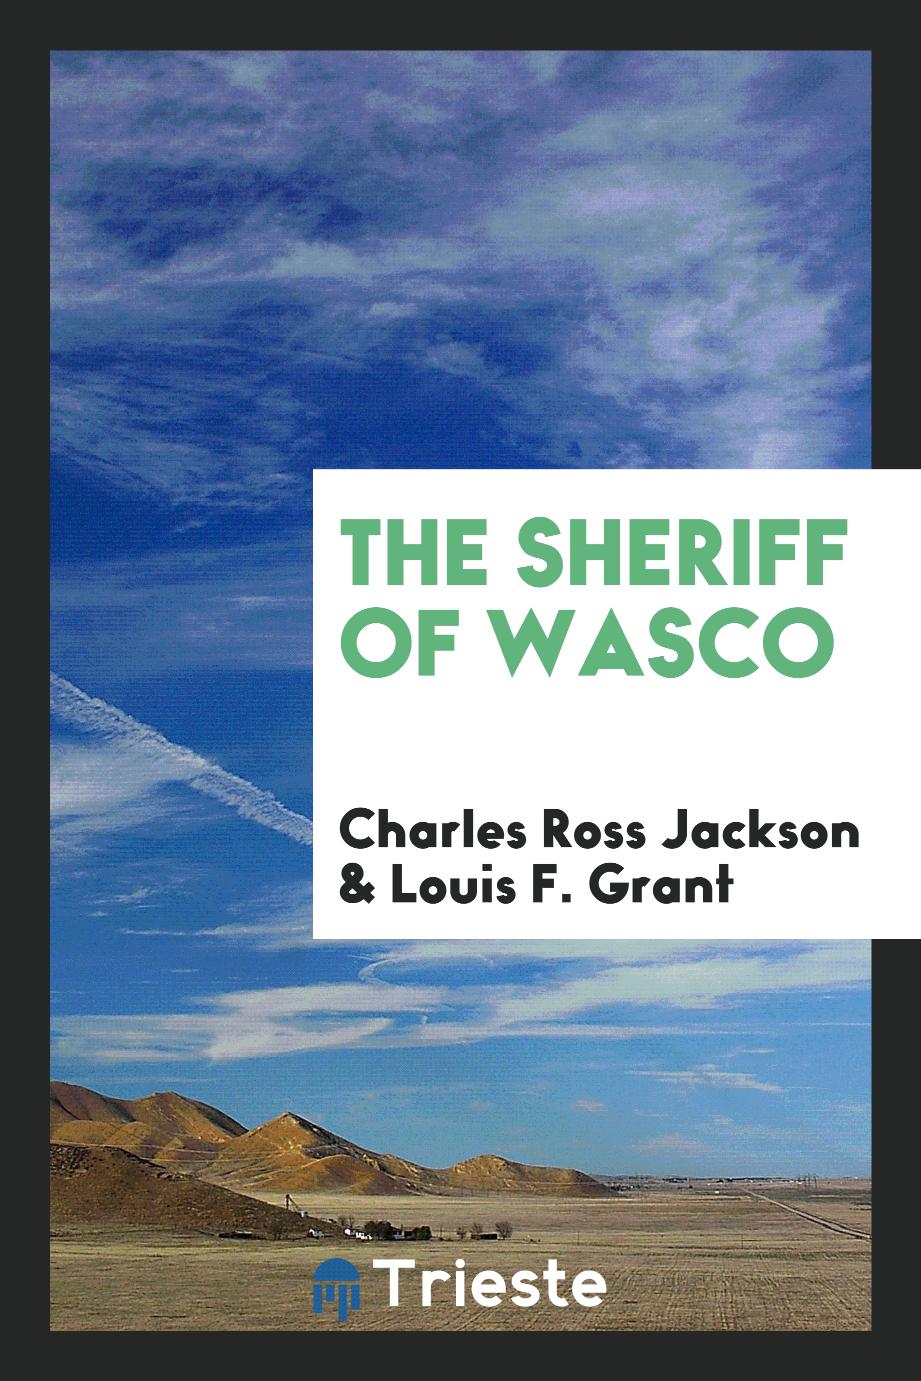 The Sheriff of Wasco